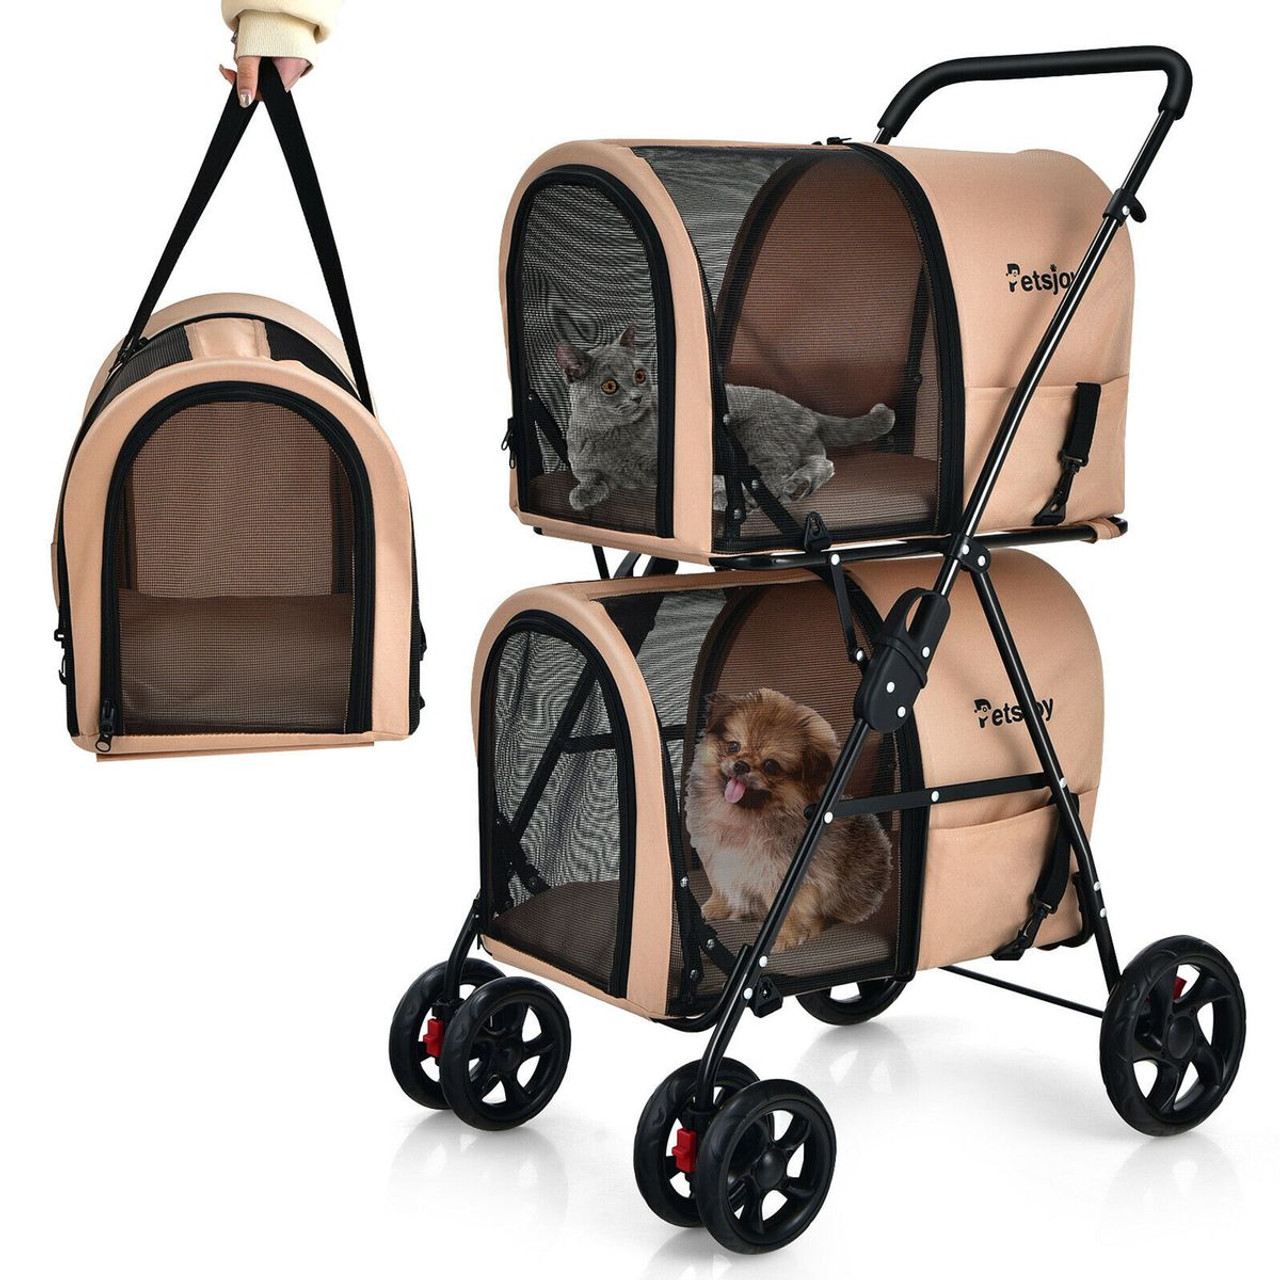 4-in-1 Double Pet Stroller with Detachable Carrier and Travel Carriage product image